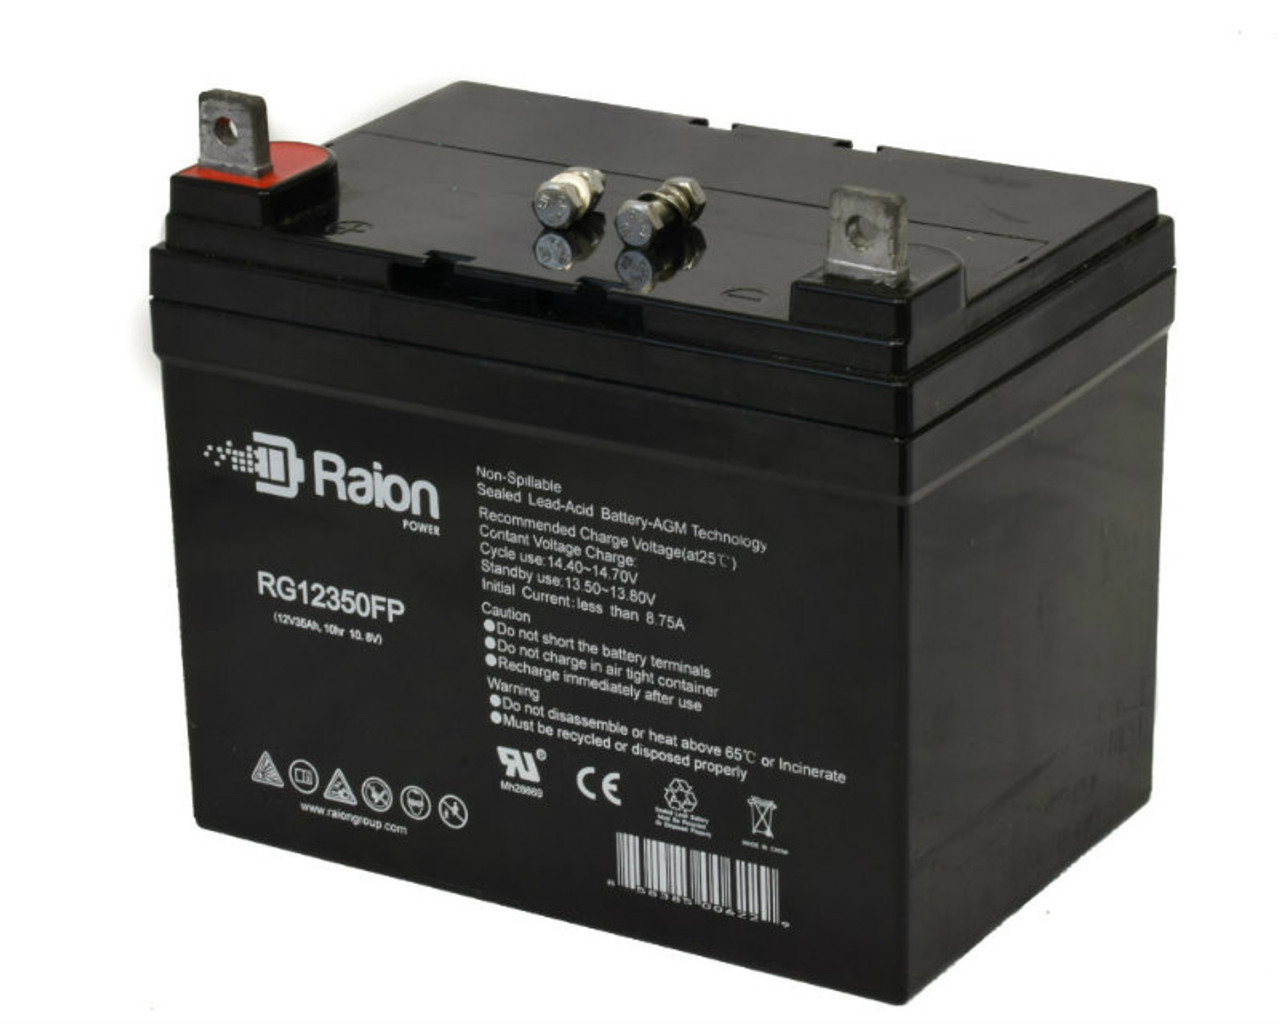 Raion Power Replacement 12V 35Ah Battery for Agco Allis 409G - 1 Pack